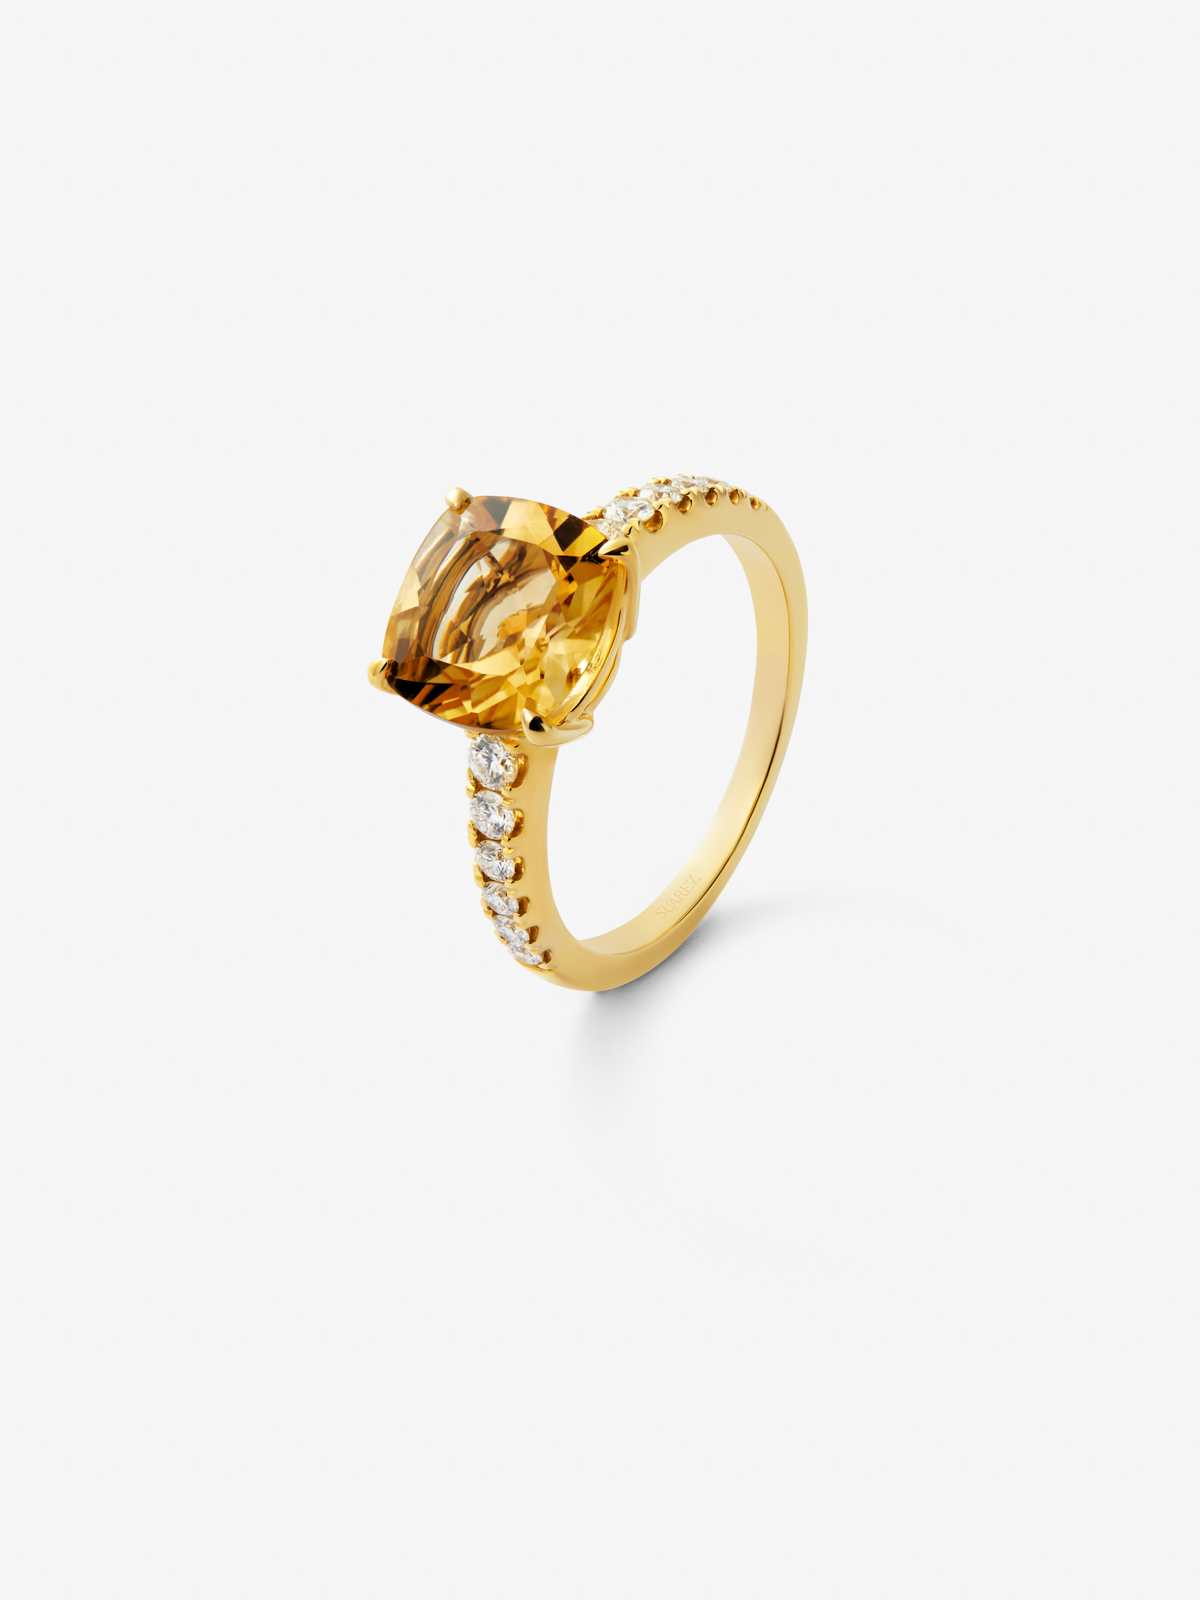 18K Yellow Gold Solitaire Ring with Citrine and Diamond